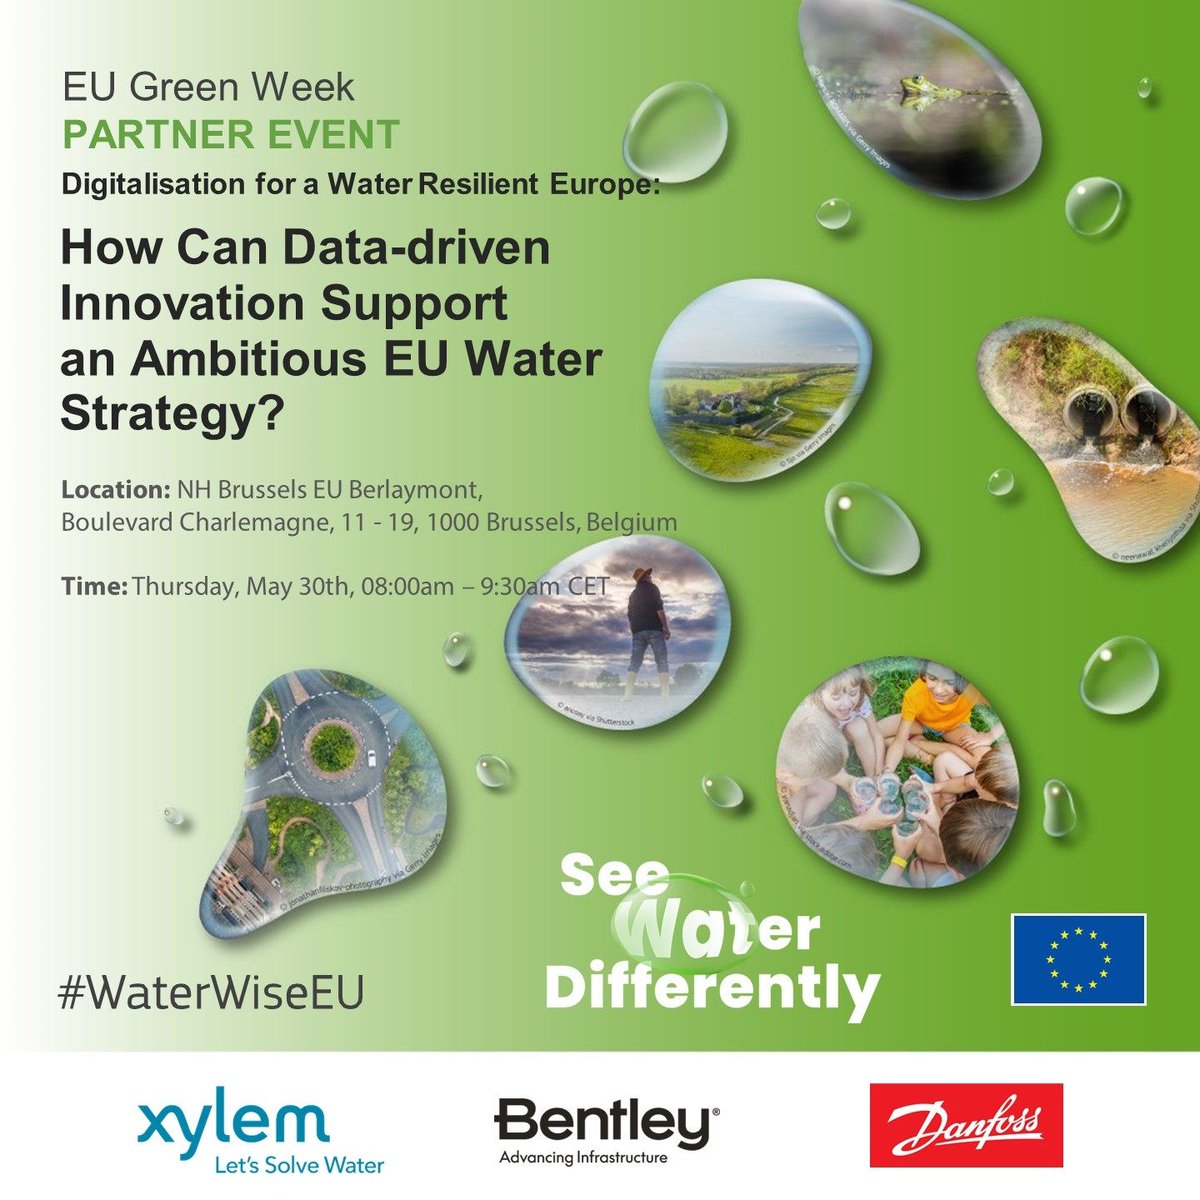 🌱The #EUGreenWeek is around the corner. 🔔Don't miss the roundtable discussion on #Digitalisation for a #WaterResilient Europe organised by @BentleyUKI , in collaboration with @Danfoss & @Xylem. 🗓30 May 🕗08:00-09:30 📍Brussels Info & Registrations buff.ly/3WJWYns